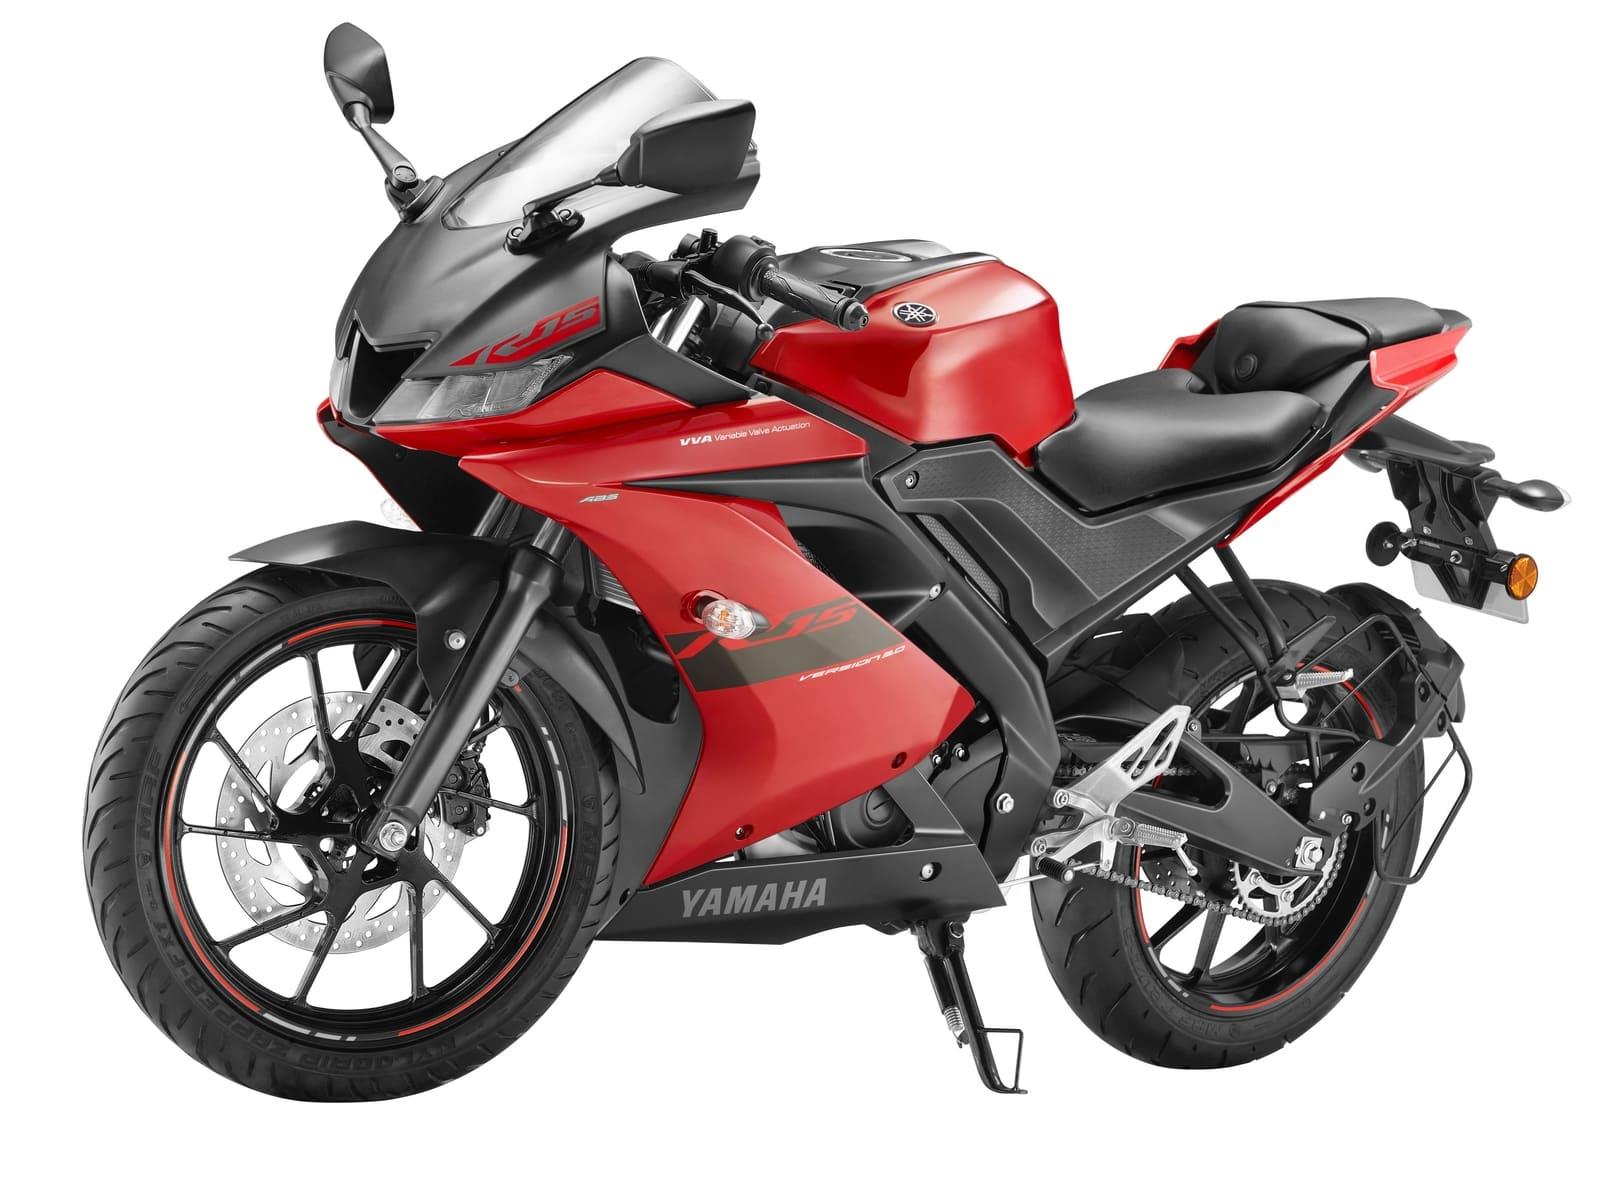 Yamaha R15  V3  Metallic Red  Specs and Price in India